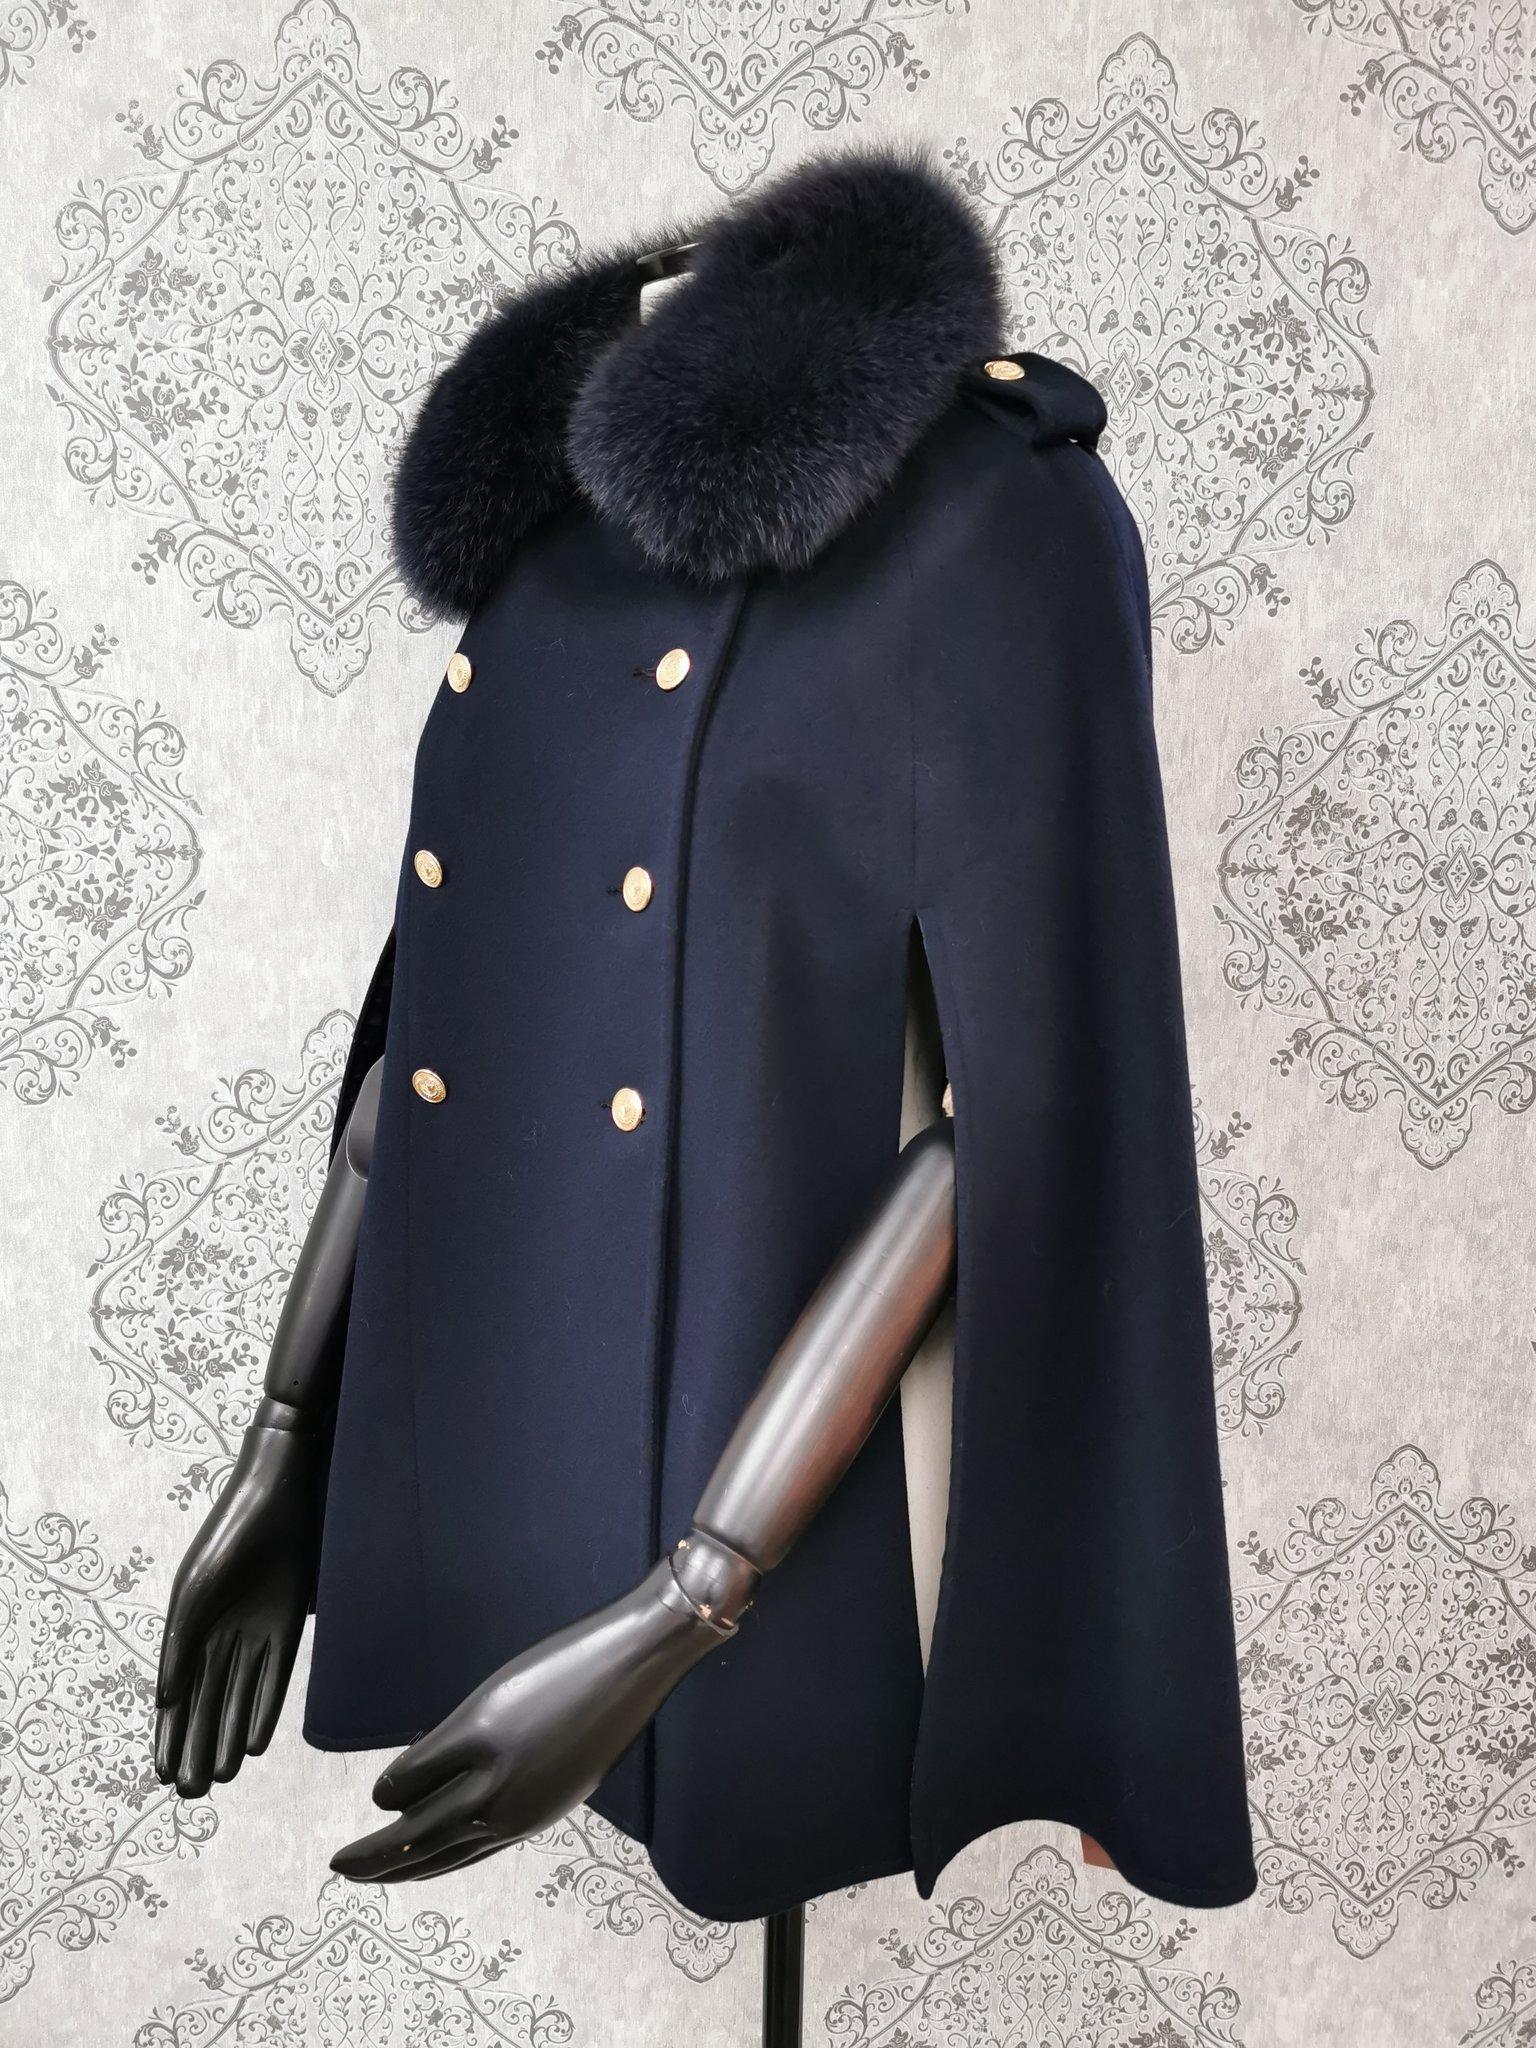 DESCRIPTION : 4800 LORO PIANA NAVY CAPE WITH FOX FUR TRIM  SIZE M

double breasted cape with navy blue loro piana material, slit pockets, real fox fur navy collar. 

Stock number : 4800 L

MADE IN ITALY

MEASUREMENTS :

SIZE :M

LENGTH :30